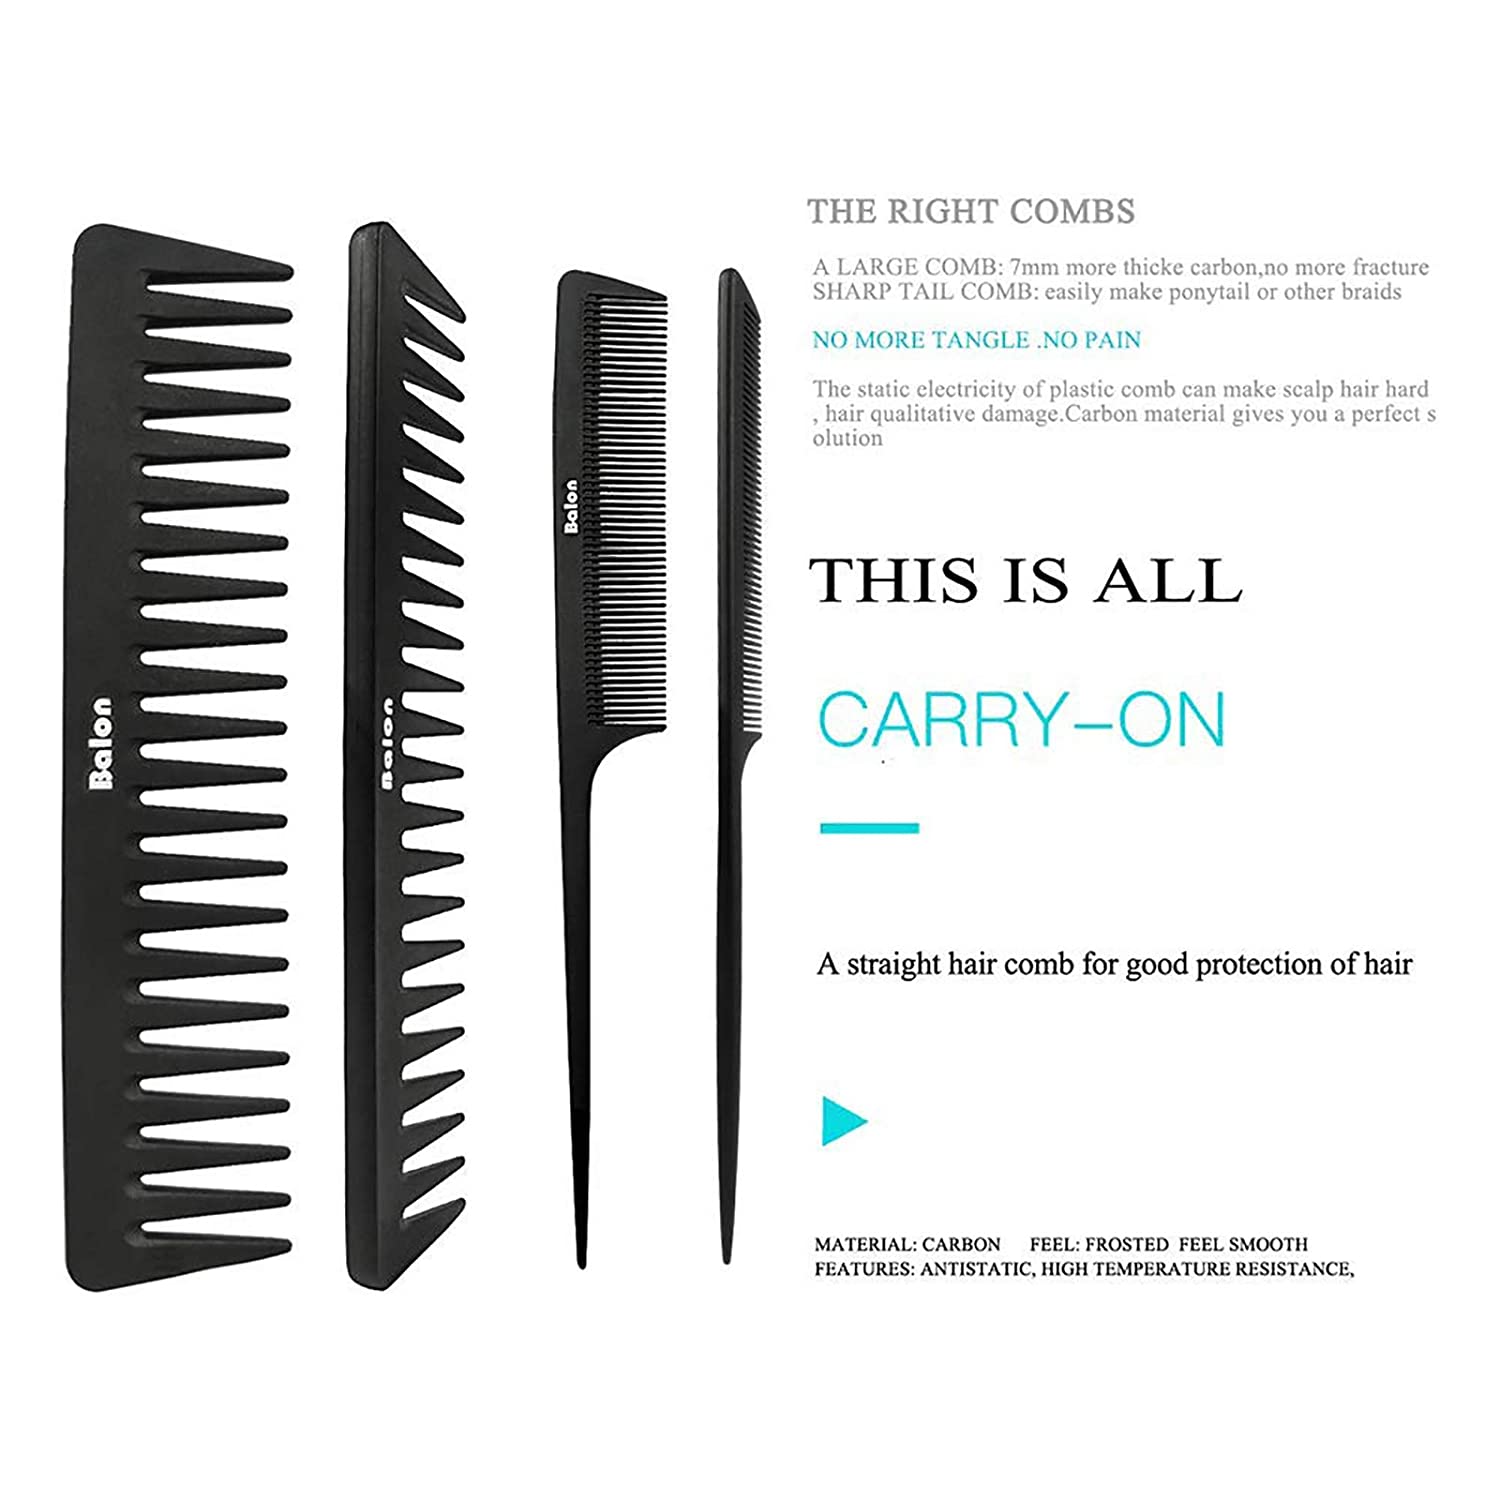 4Pcs Paddle Hair Brush, Detangling Brush and Hair Comb Set for Men and Women, Great on Wet or Dry Hair, No More Tangle Hairbrush for Long Thick Thin Curly Natural Hair